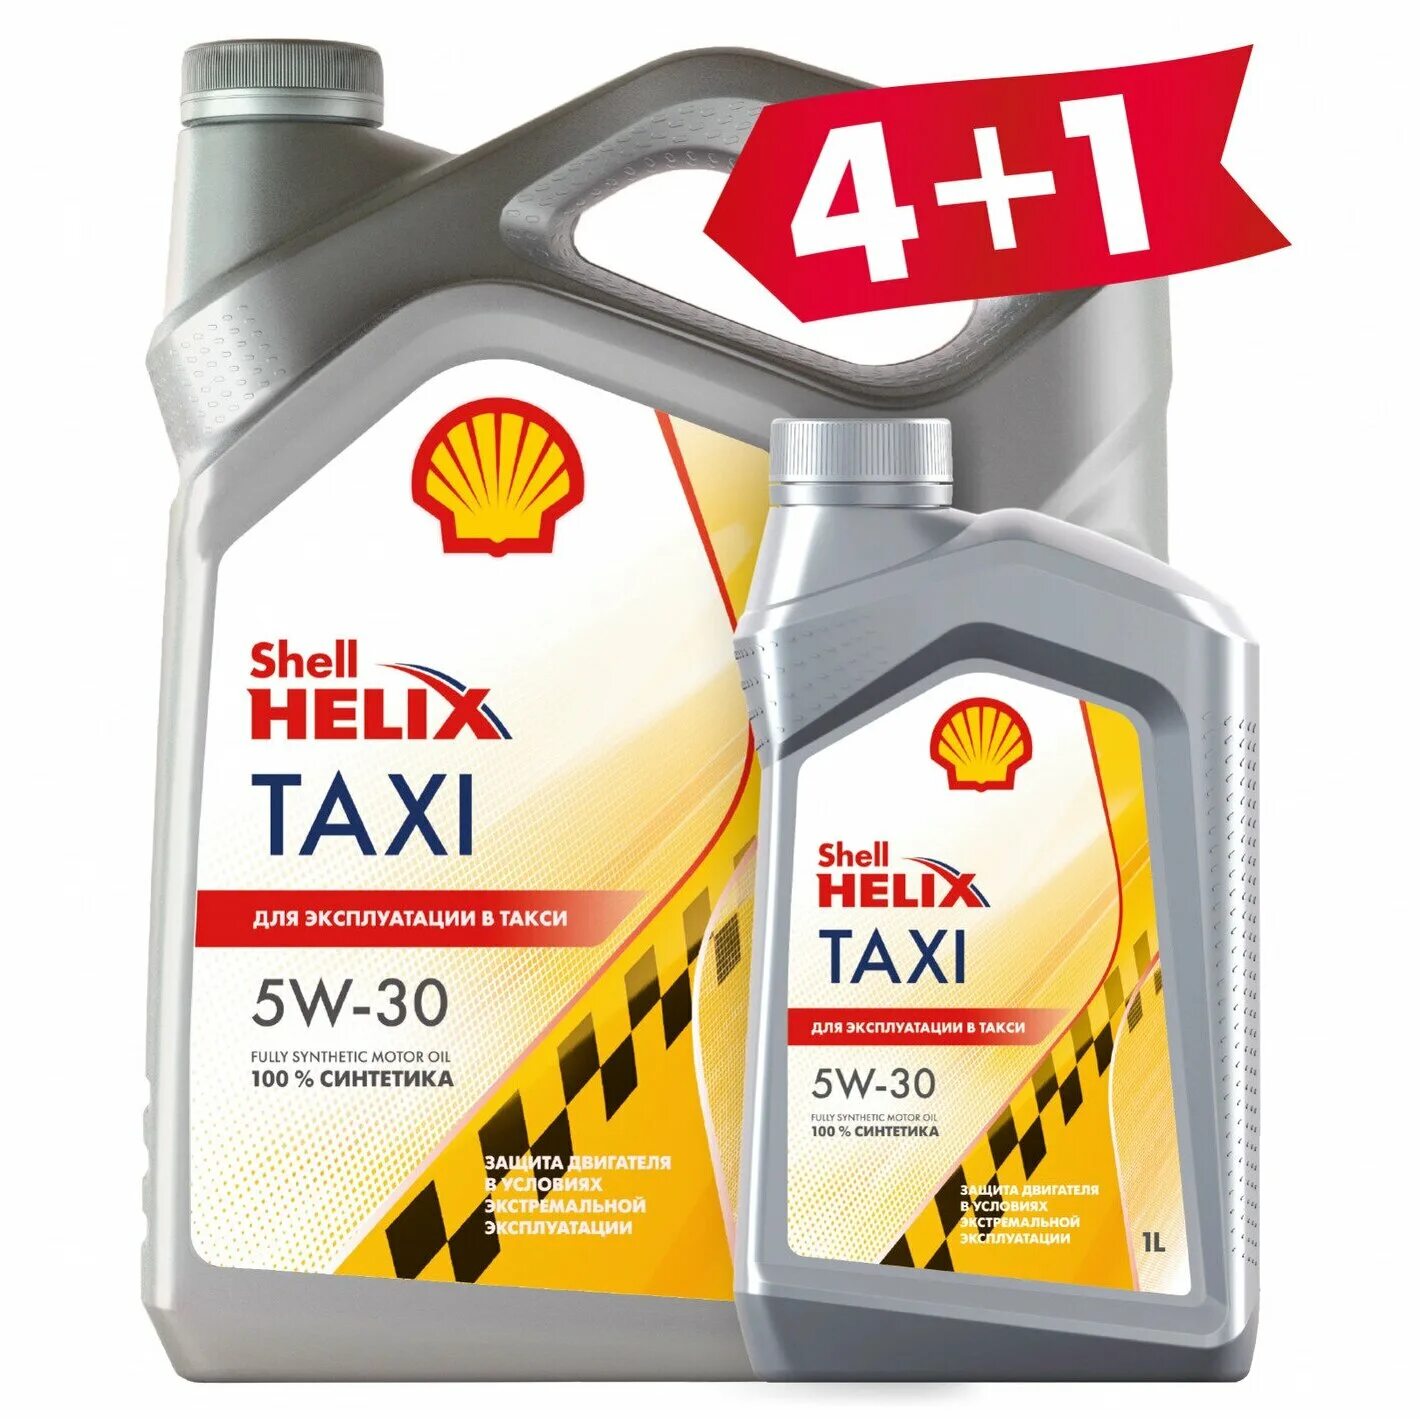 Shell моторные масла 5. Shell Helix Taxi 5w-40 1л. Масло Шелл такси 5w30. Масло Шелл такси 5w40. Shell Taxi 5w-30.